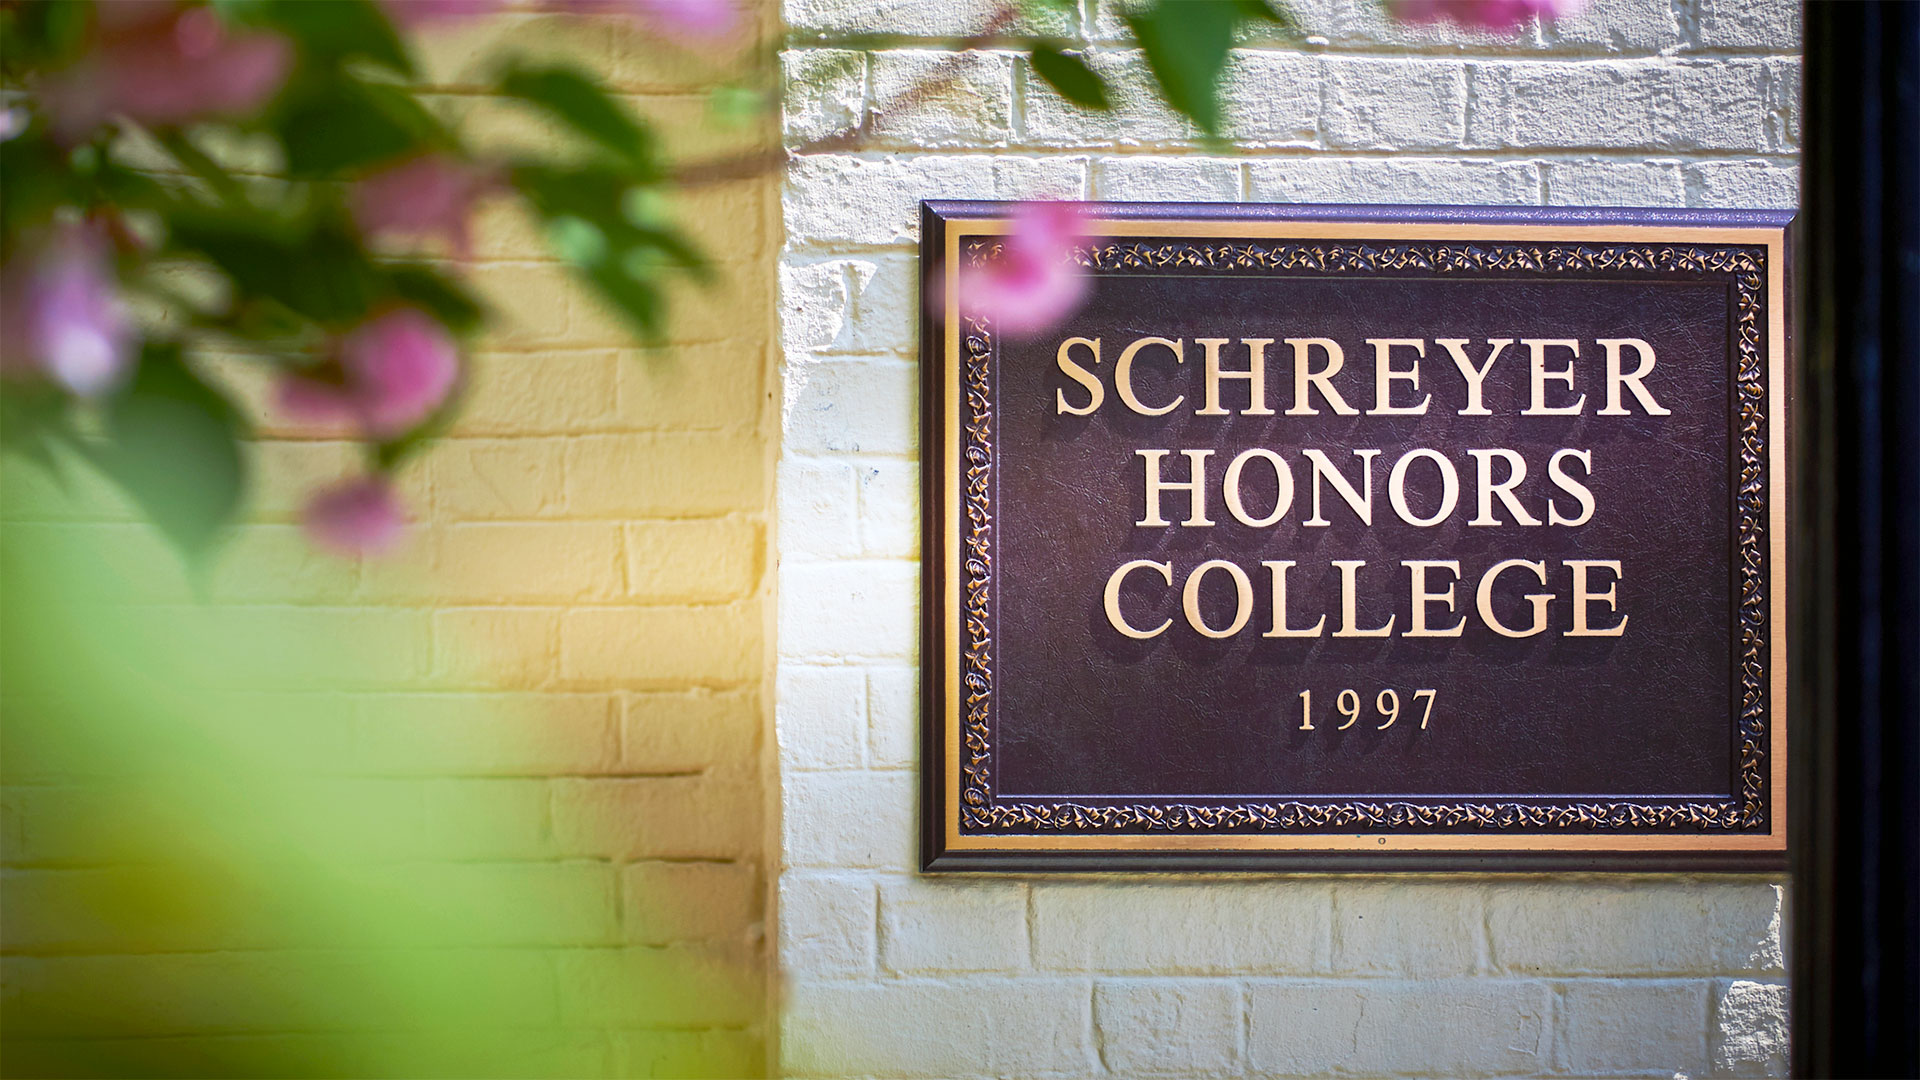 schreyer honors college essay questions